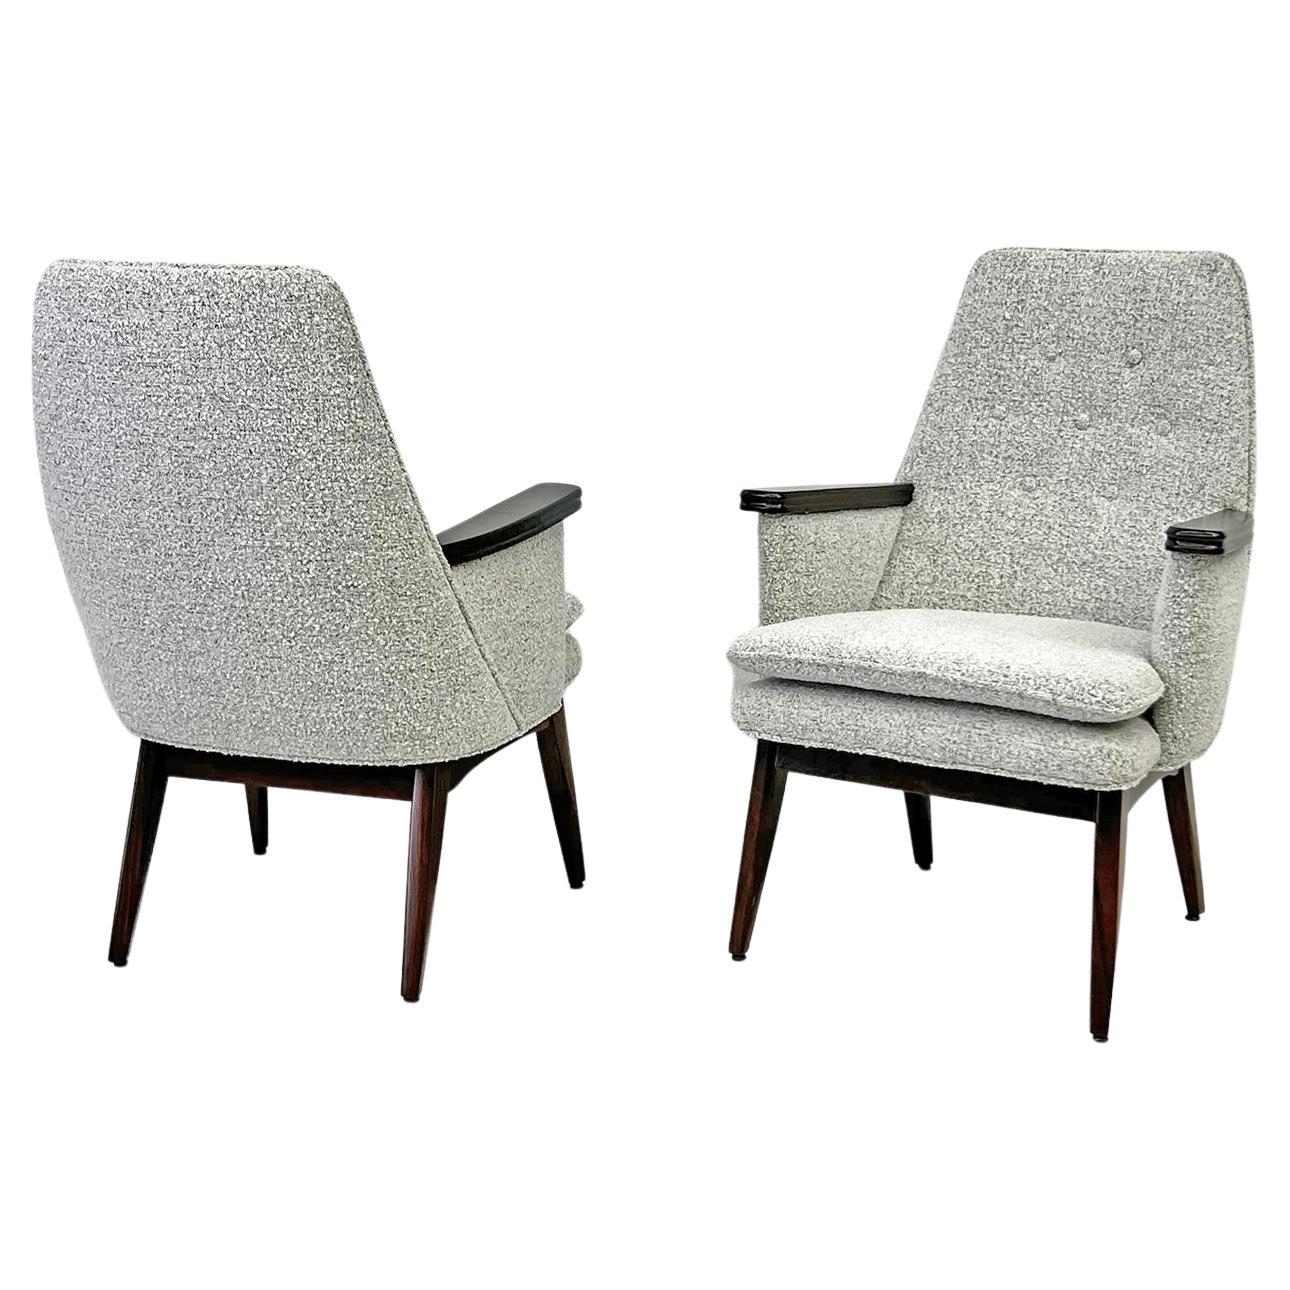 Button Tufted Mid Century Modern Lounge Chairs in Salt & Pepper Boucle Walnut For Sale